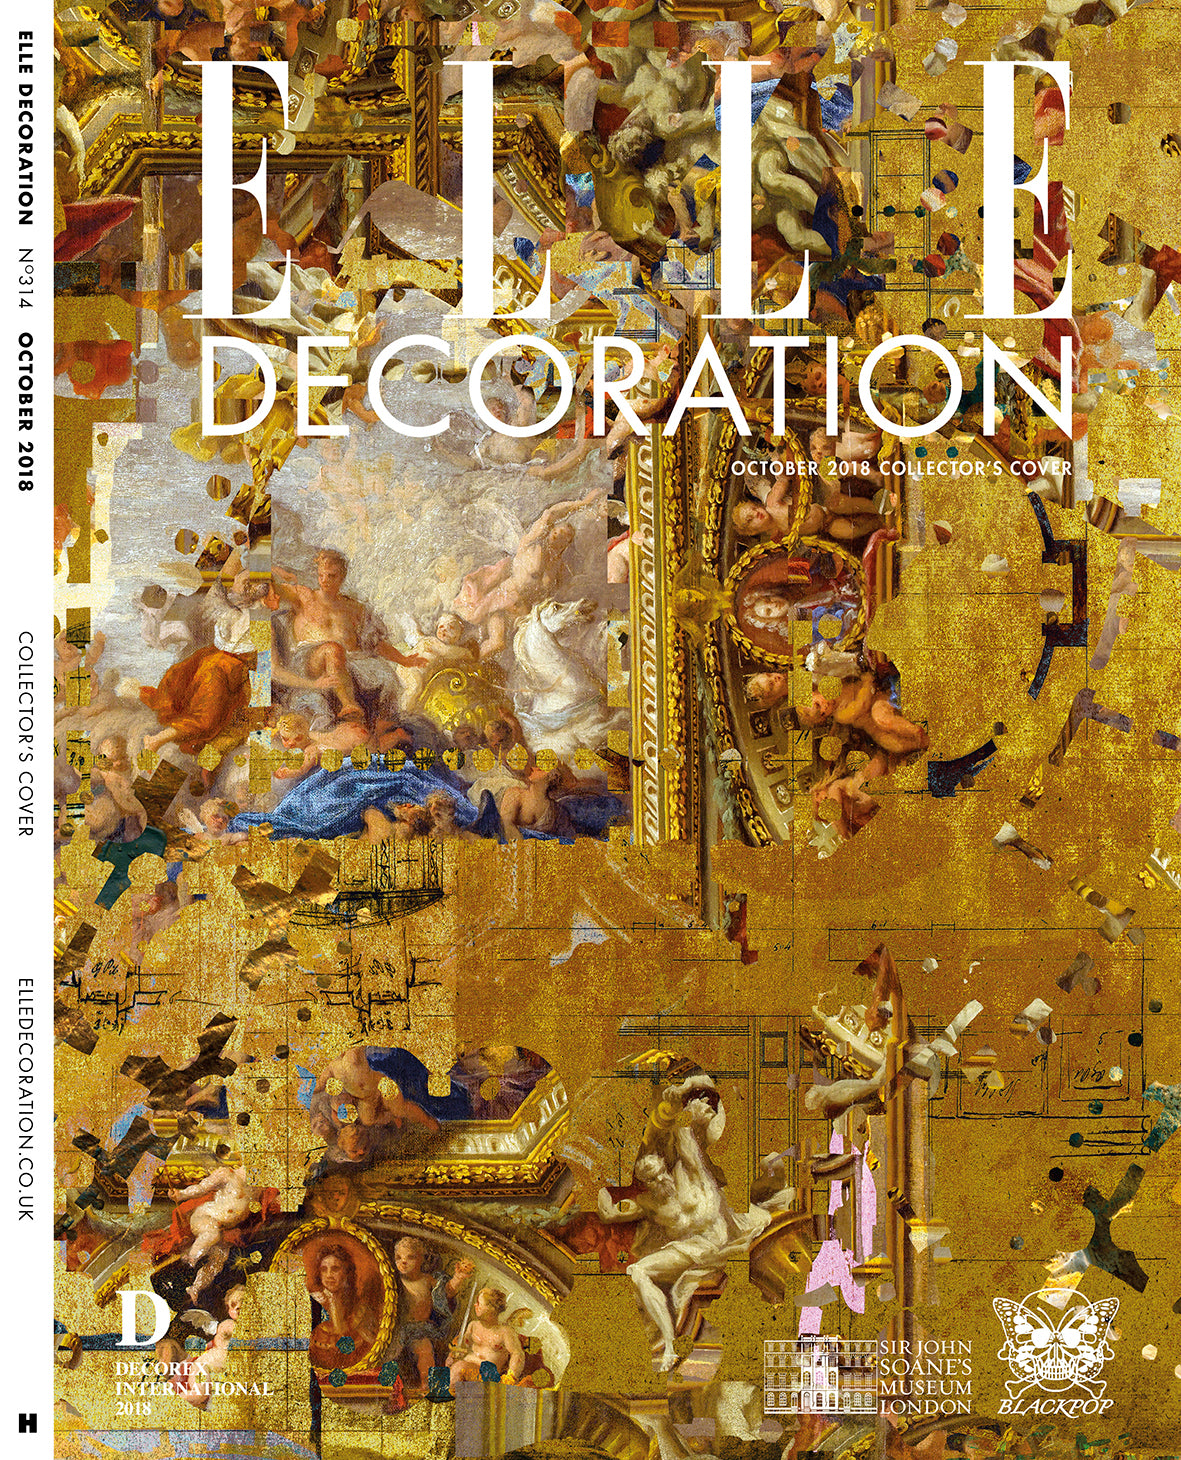 ELLE DECORATION COLLECTOR'S COVER BLACKPOP